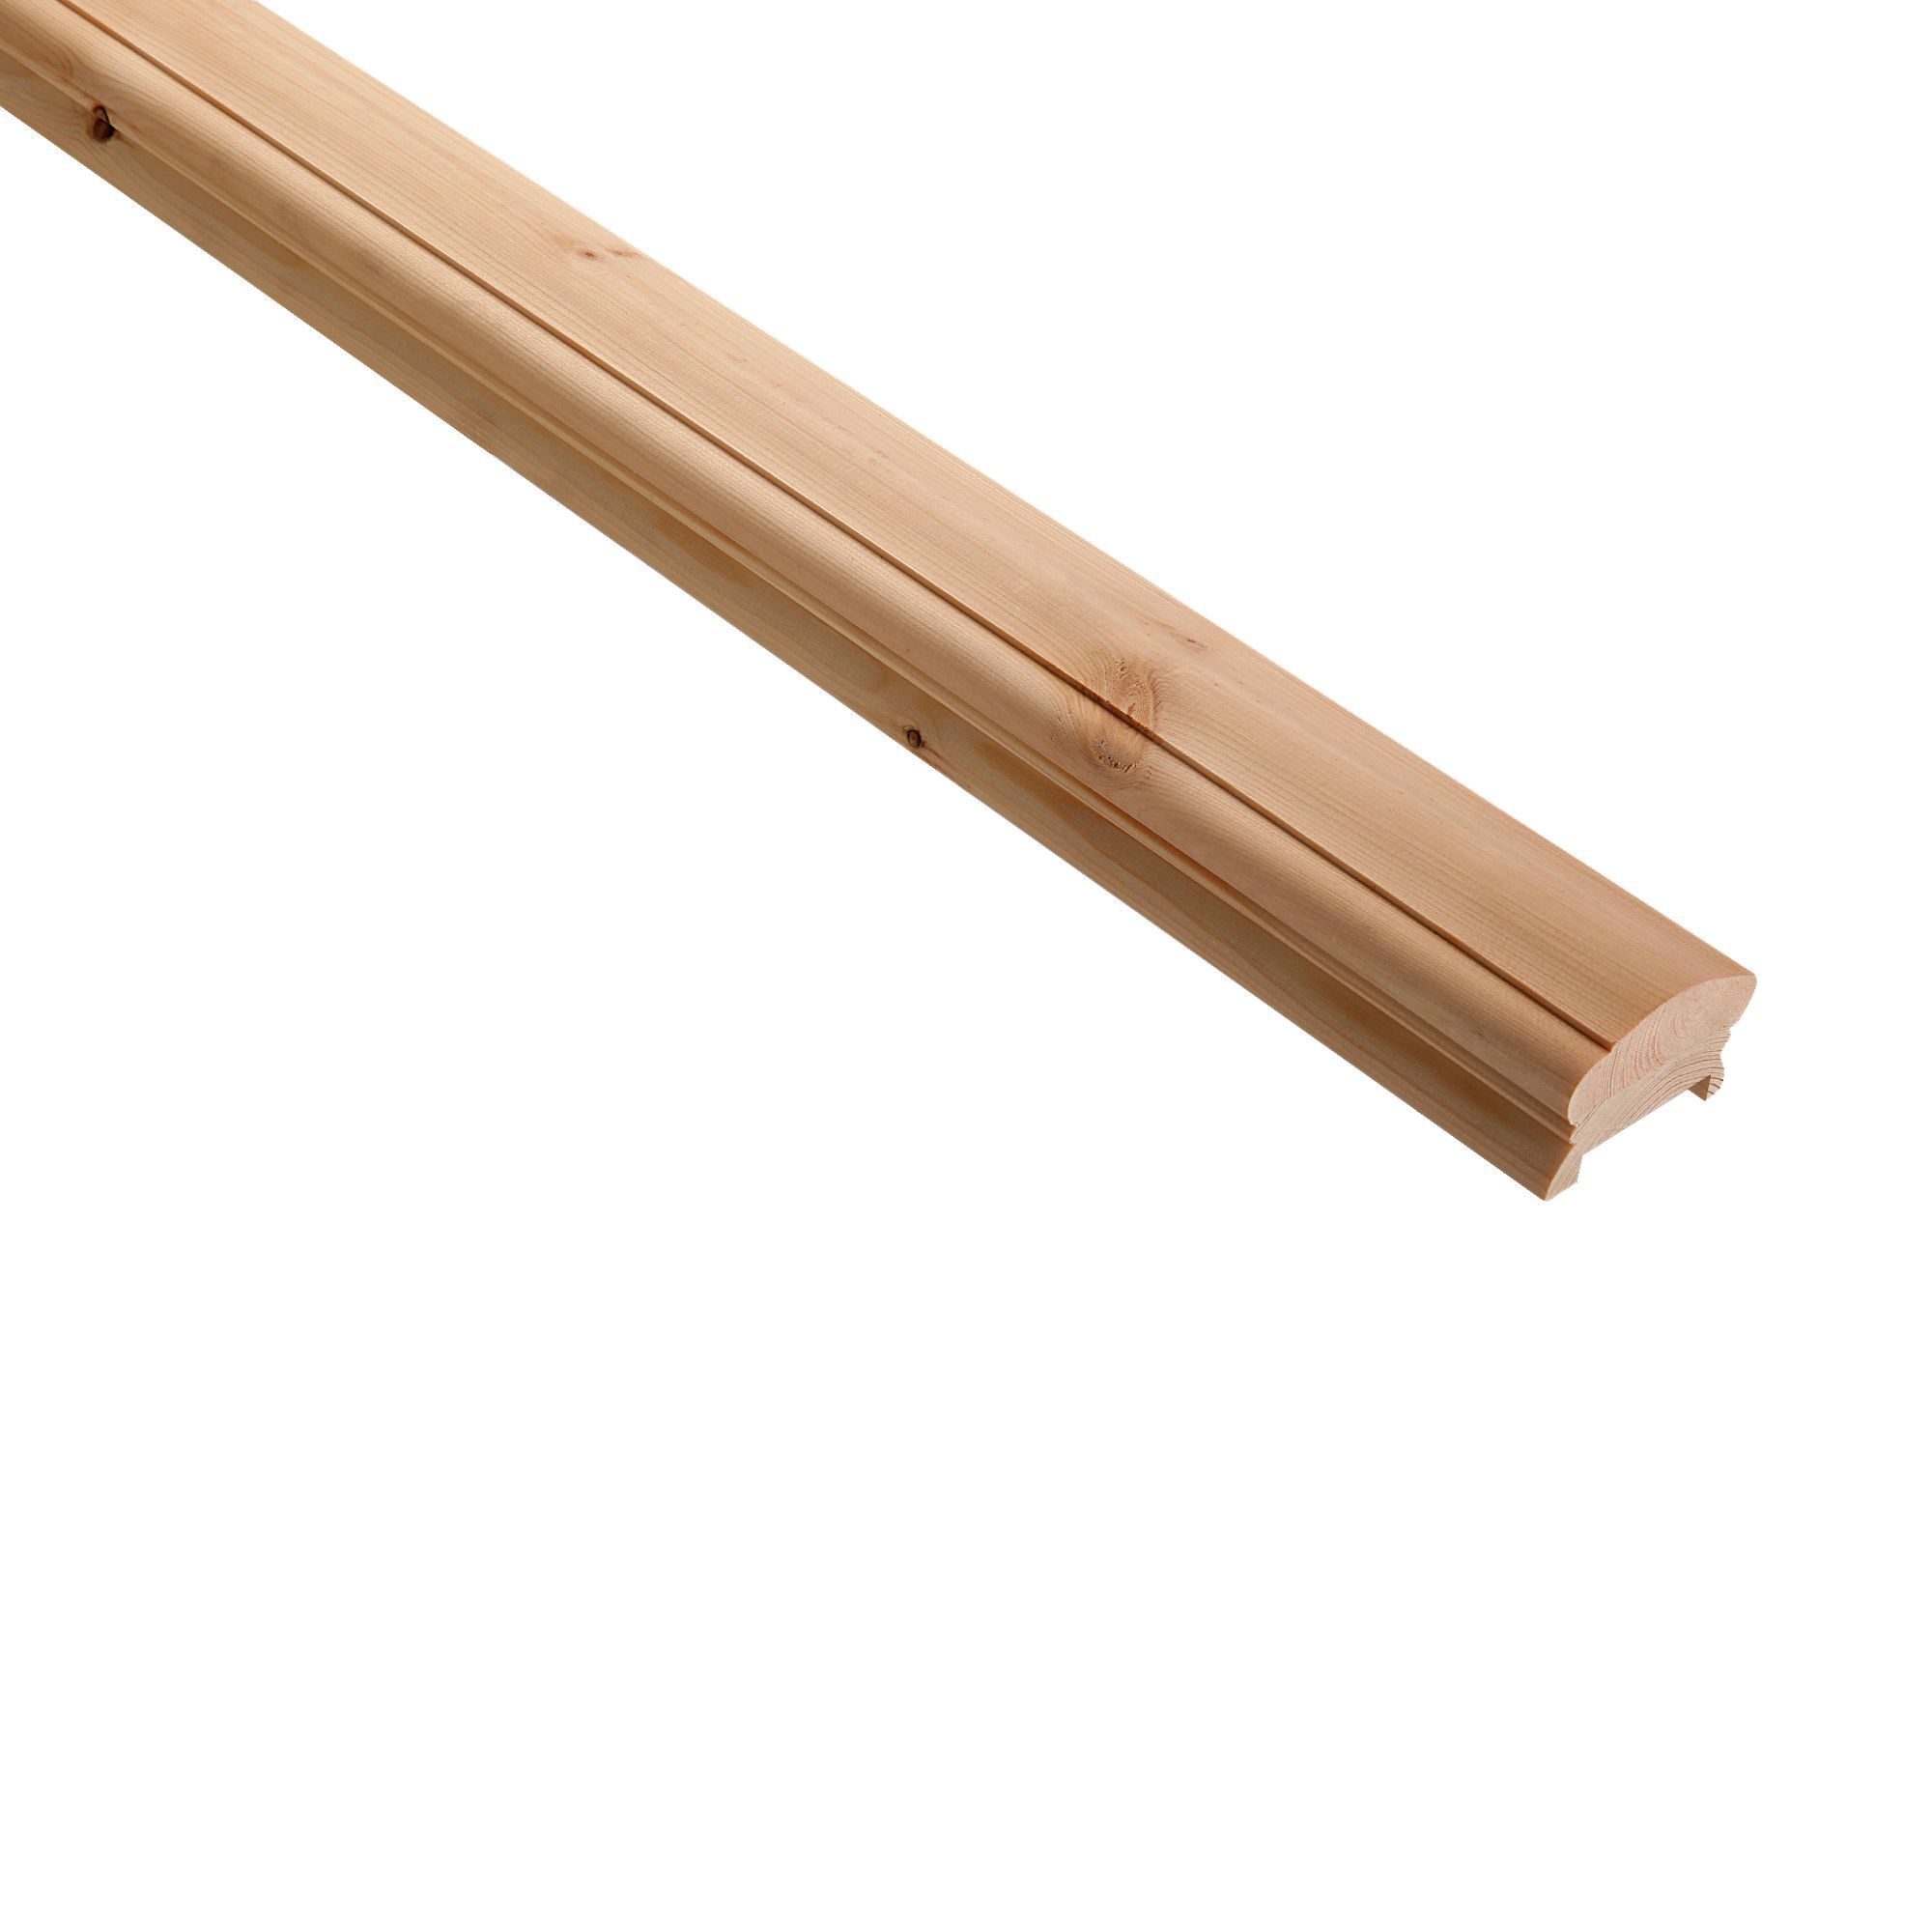 Cheshire Mouldings Traditional Pine 41mm Light Handrail, (L)3.6M (W)62mm